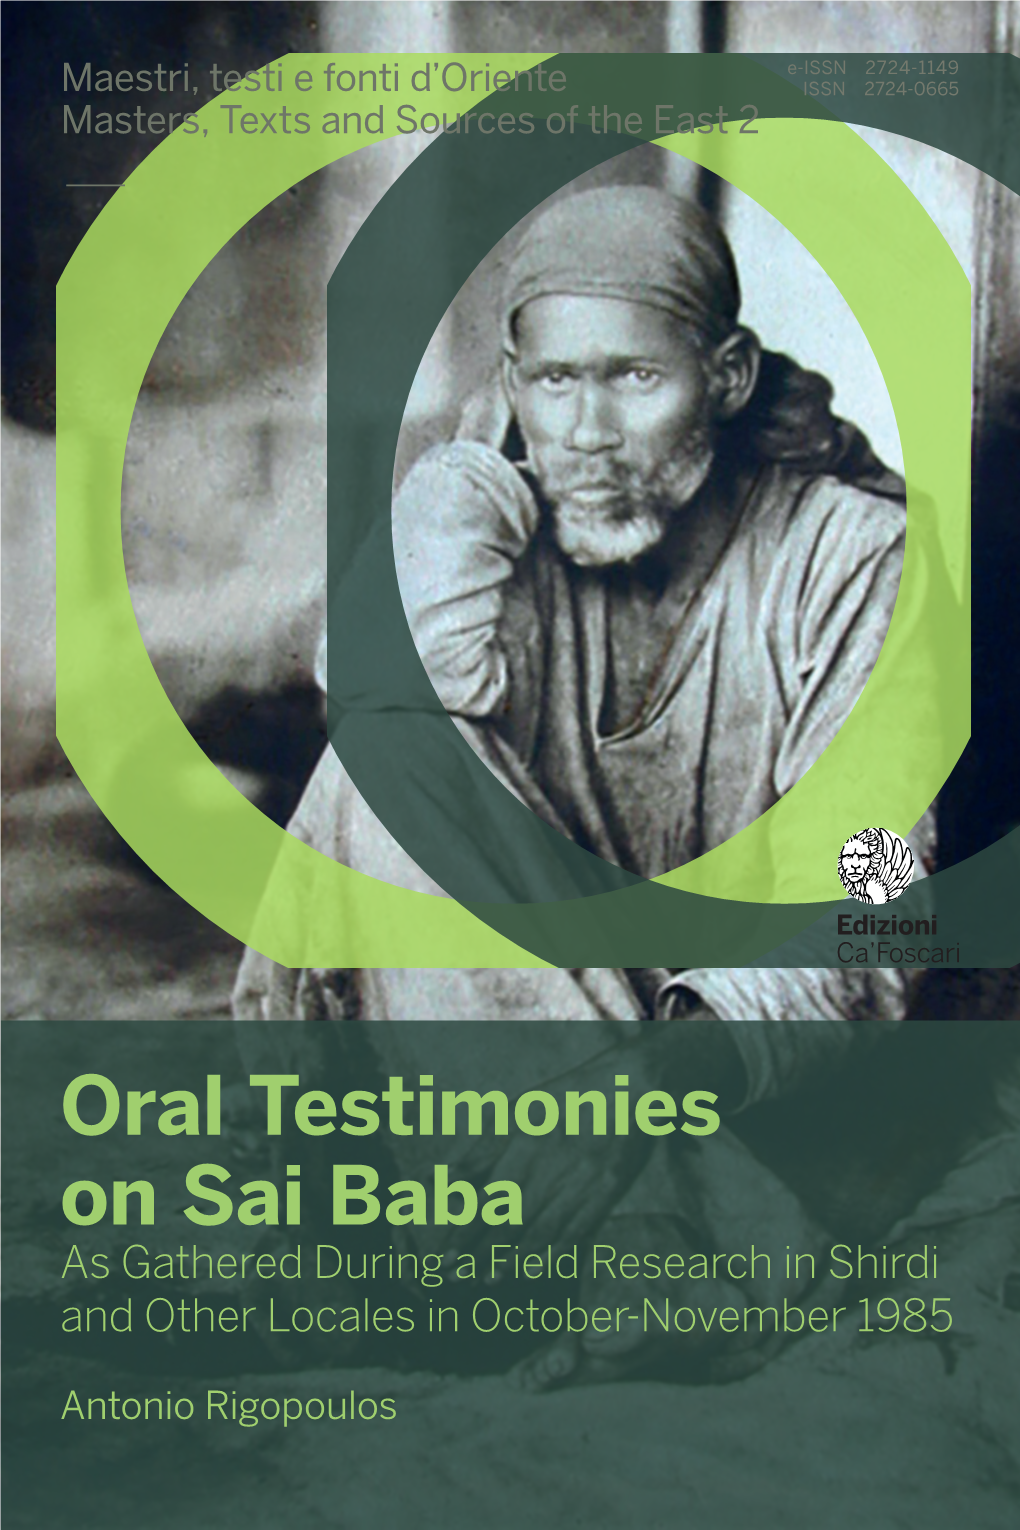 Oral Testimonies on Sai Baba As Gathered During a Field Research in Shirdi and Other Locales in October-November 1985